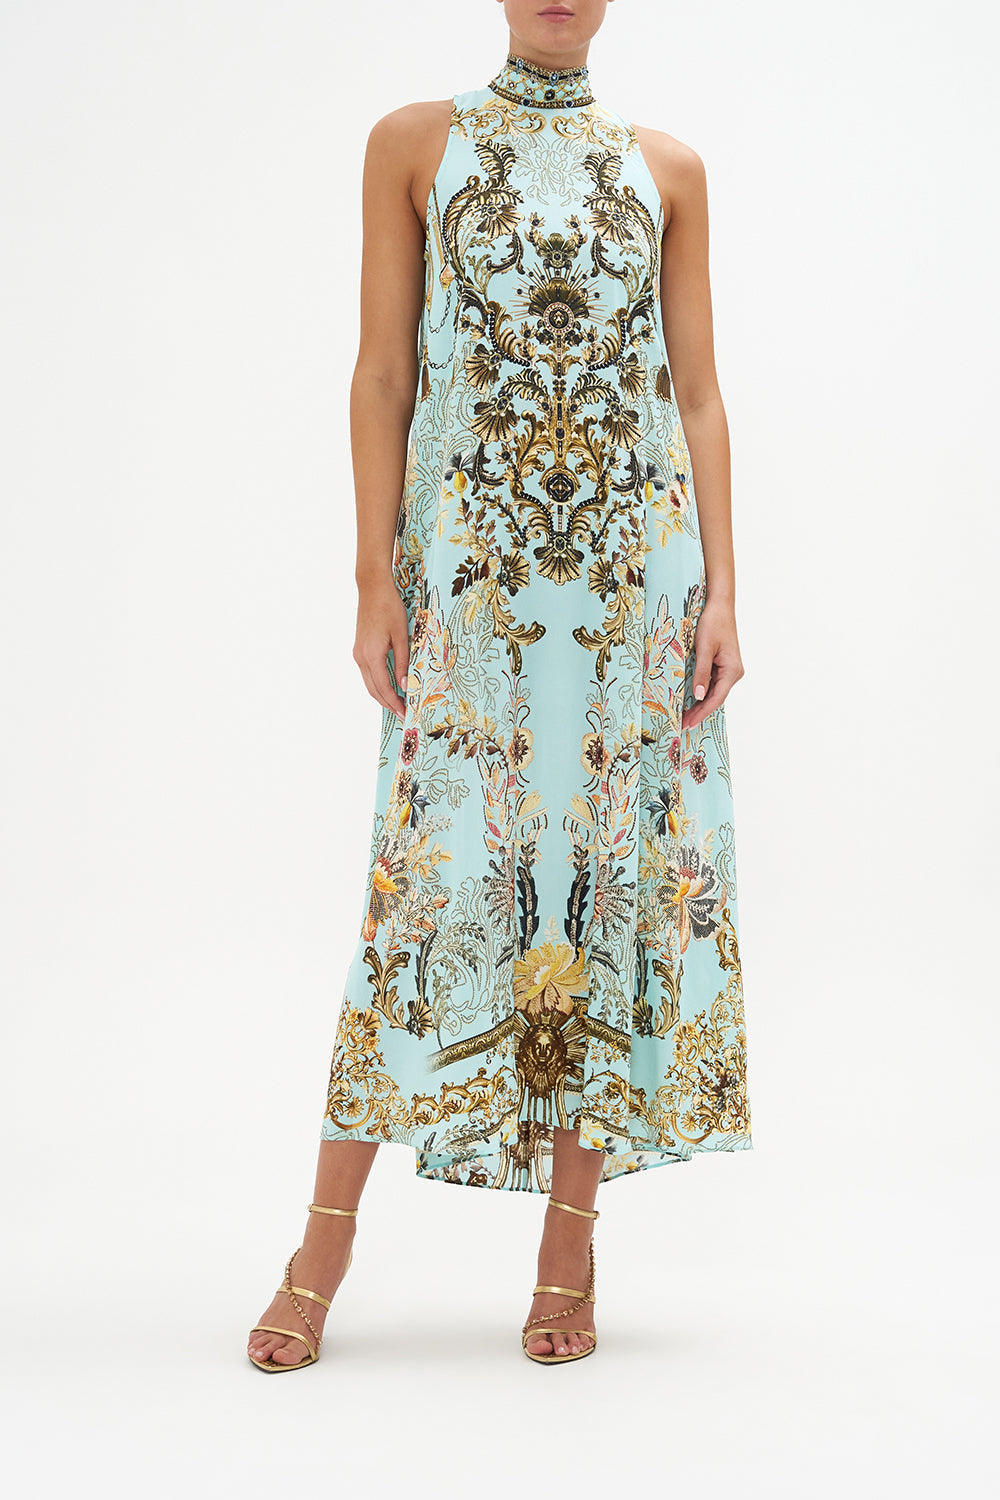 High Neck Dress With Back Neck Tie Adieu Yesterday print by CAMILLA